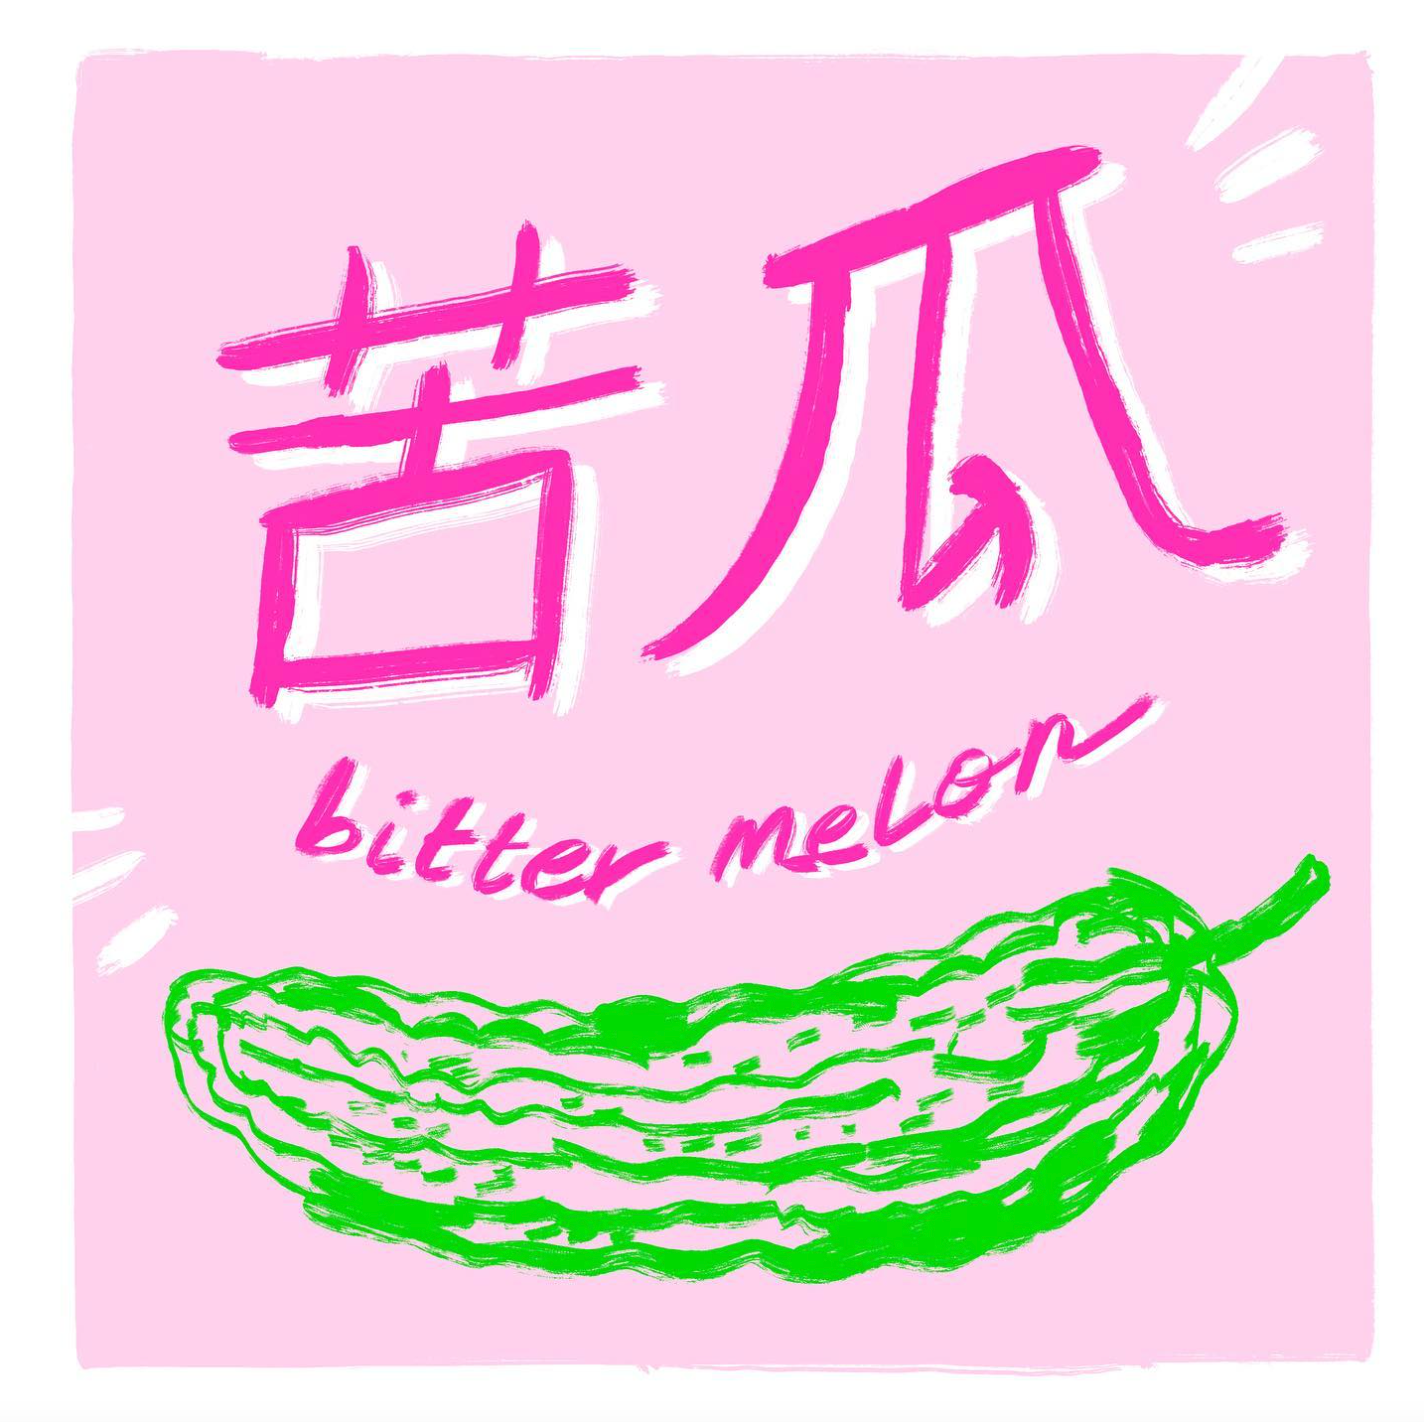 "bitter melon" written in pink English and Chinese script with a green print of a bitter melon below  